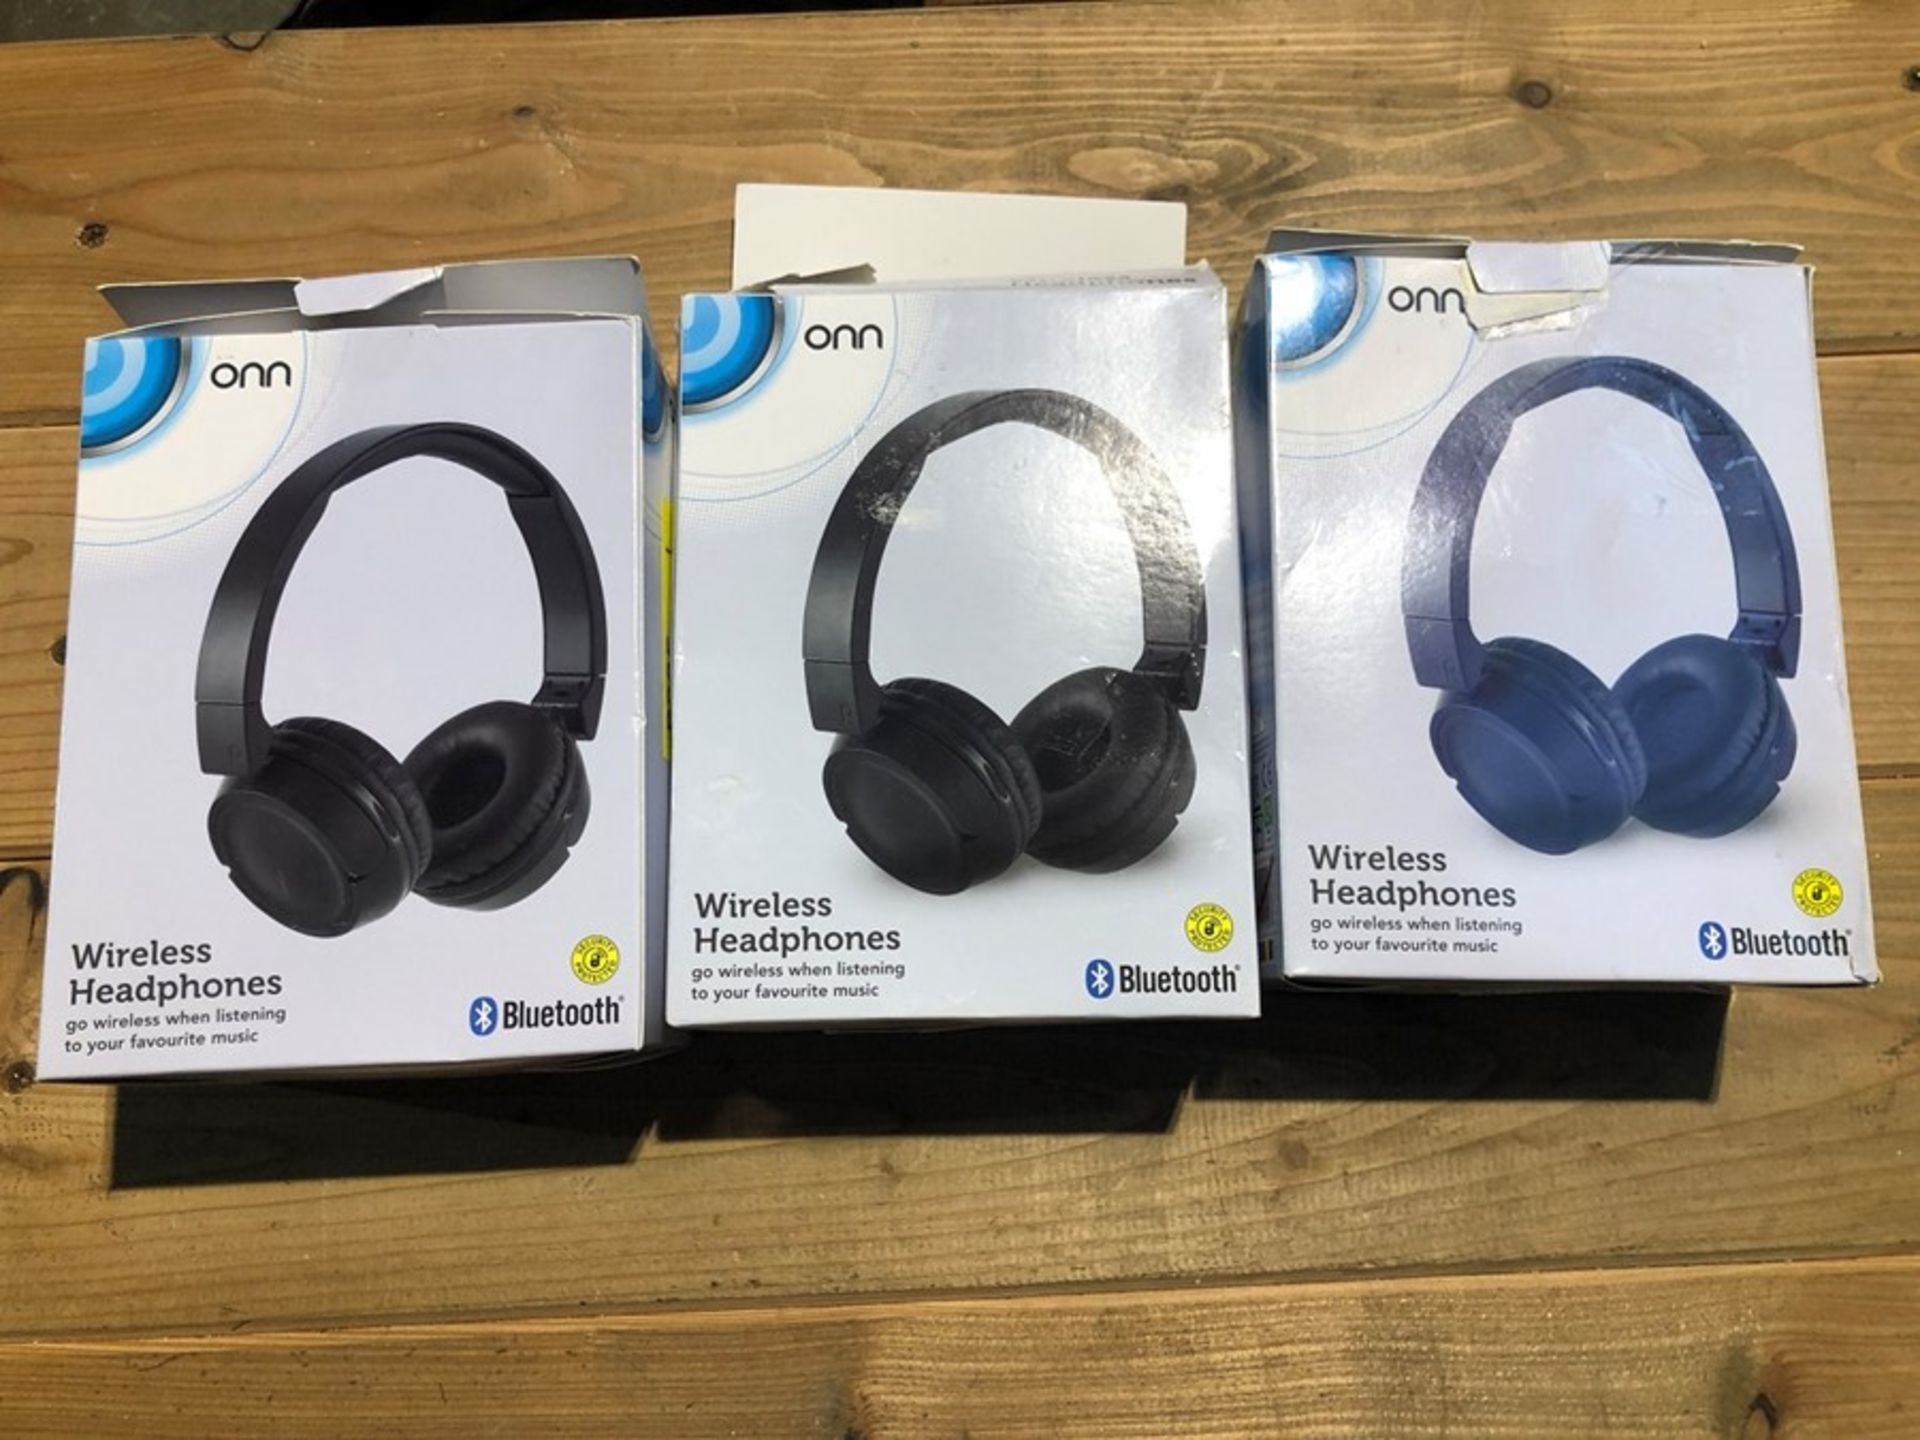 1 LOT TO CONTAIN 3 BOXED ONN WIRELESS HEADPHONES IN BLACK/BLUE / BL-9242 (PUBLIC VIEWING AVAILABLE)